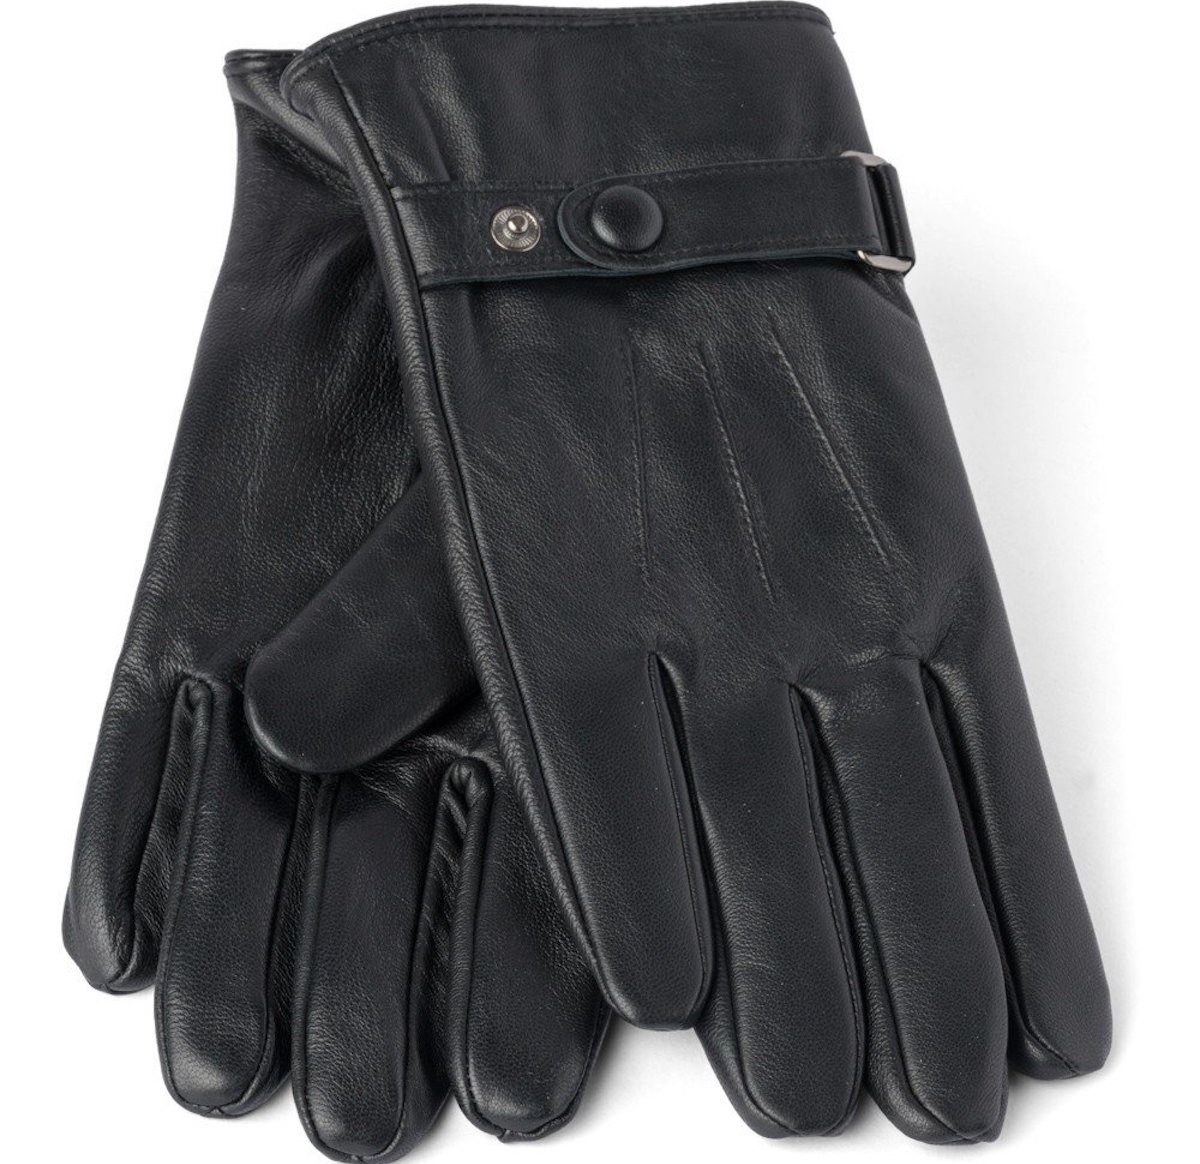 Black leather gloves - Men's Christmas party wear